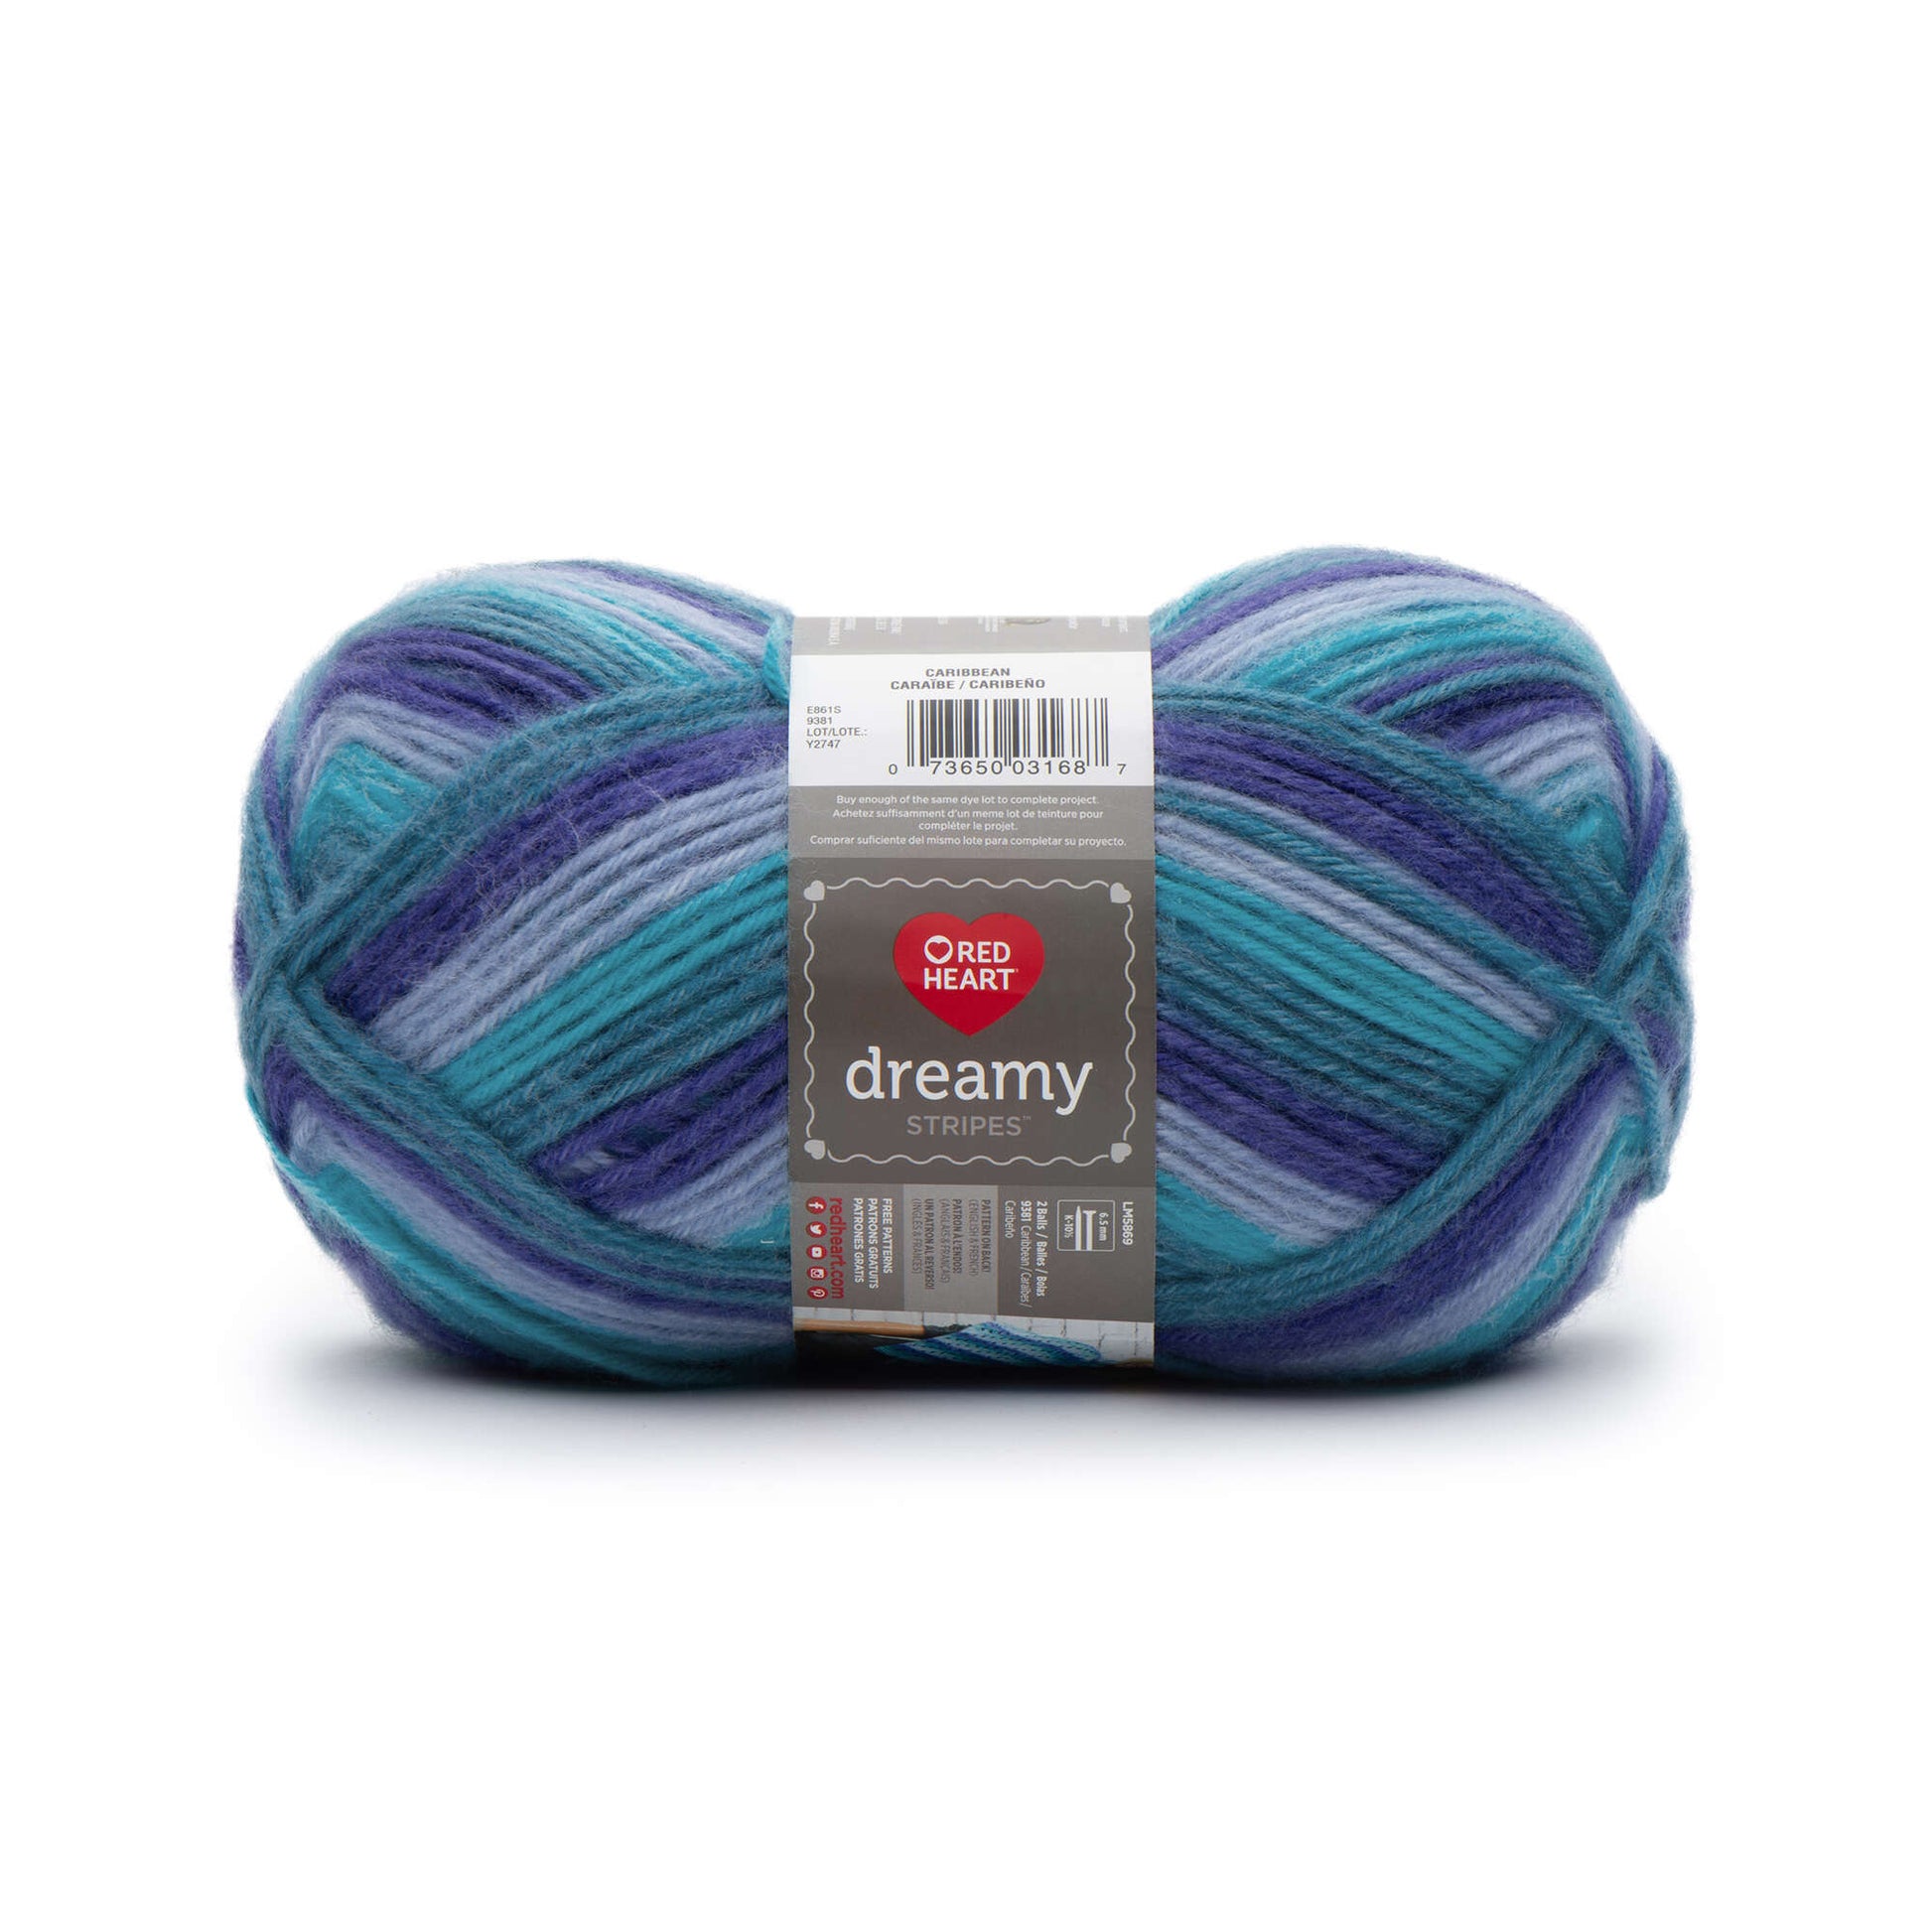 Red Heart Dreamy Stripes Yarn - Discontinued shades